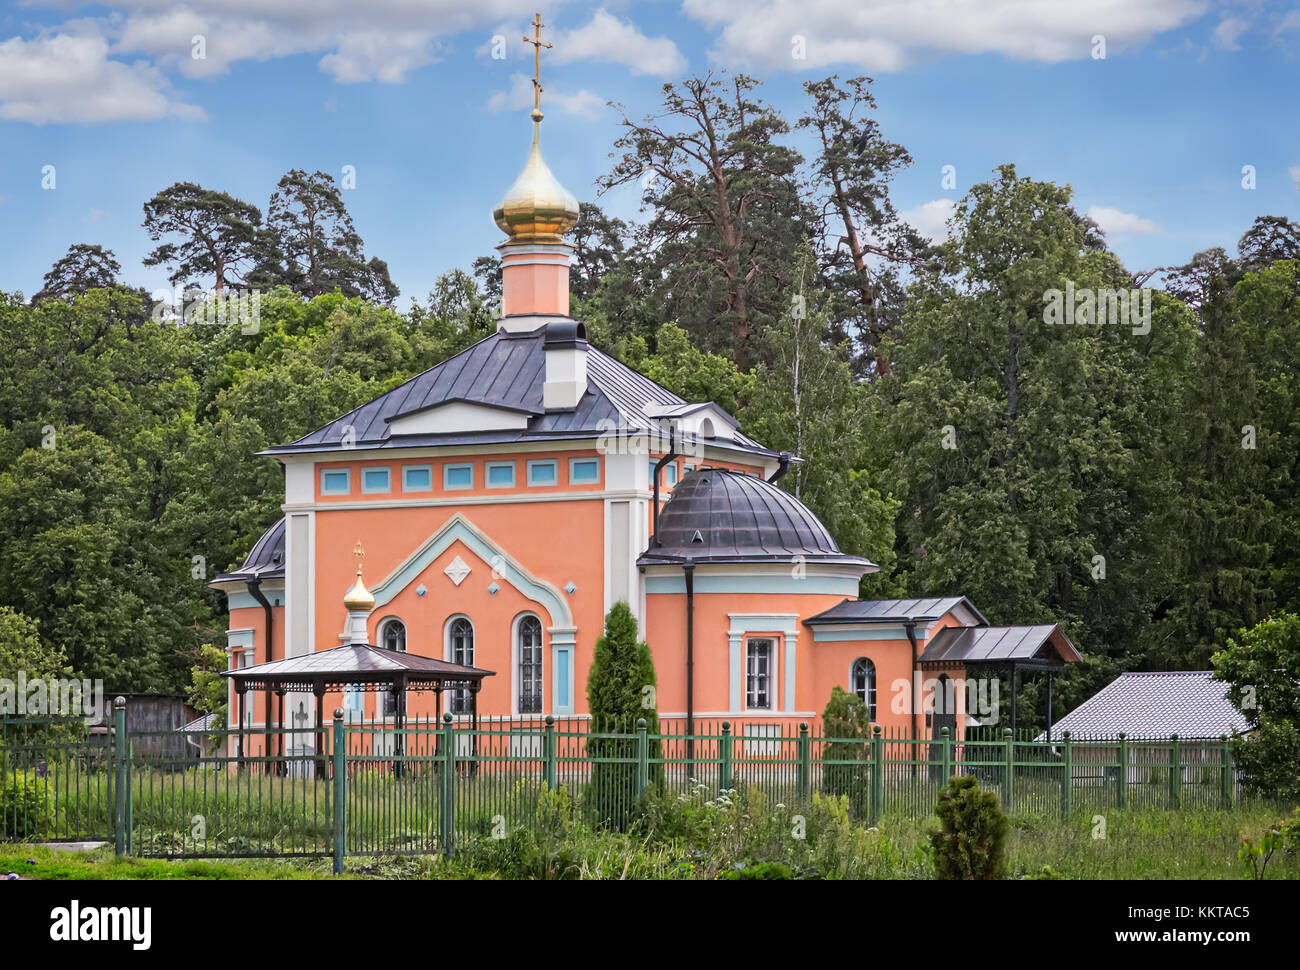 A beautiful Orthodox temple located on a hill surrounded by flowers and plants: arborvitae, blue spruce, shrubs. Stock Photo